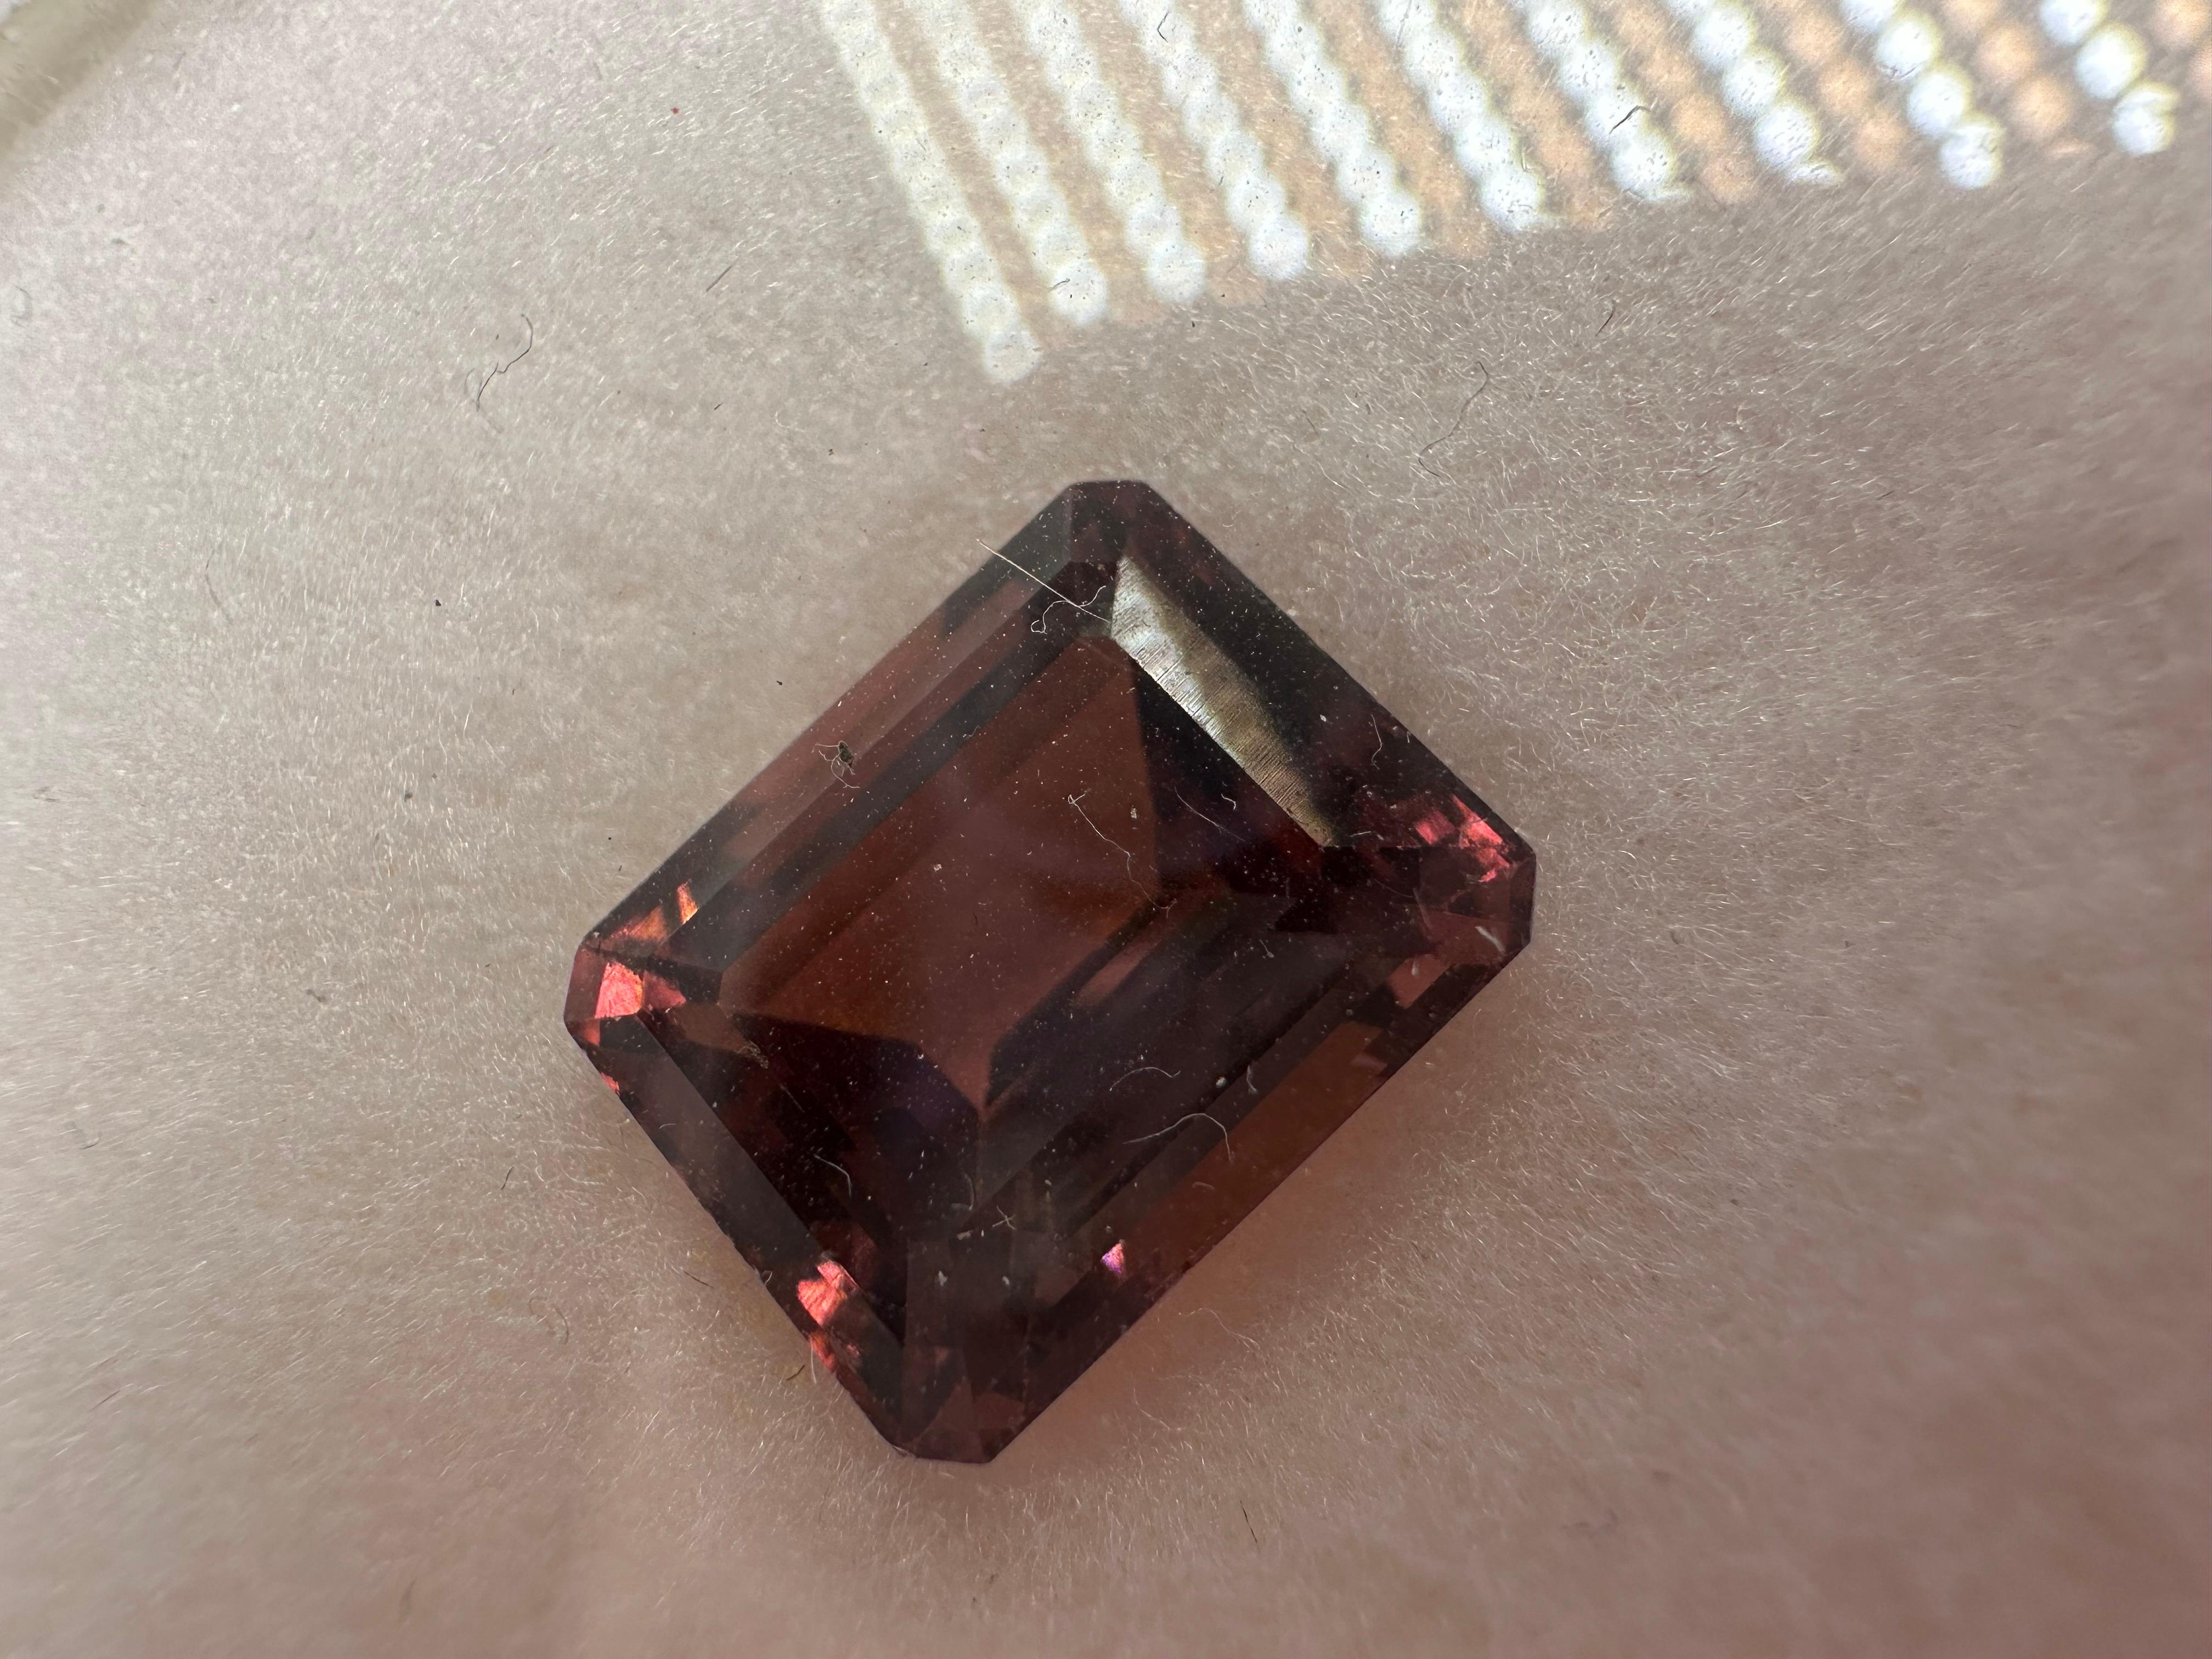 Pink tourmaline, large in size, will come with a certificate of authenticity.

NATURAL GEMSTONE(S): PINK TOURMALINE
Clarity/Color: Slightly Included/Pink
Cut: Rectangular
Treatment: none
MM:13.5x10.9mm
Carat:9.67ct

WHAT YOU GET AT STAMPAR